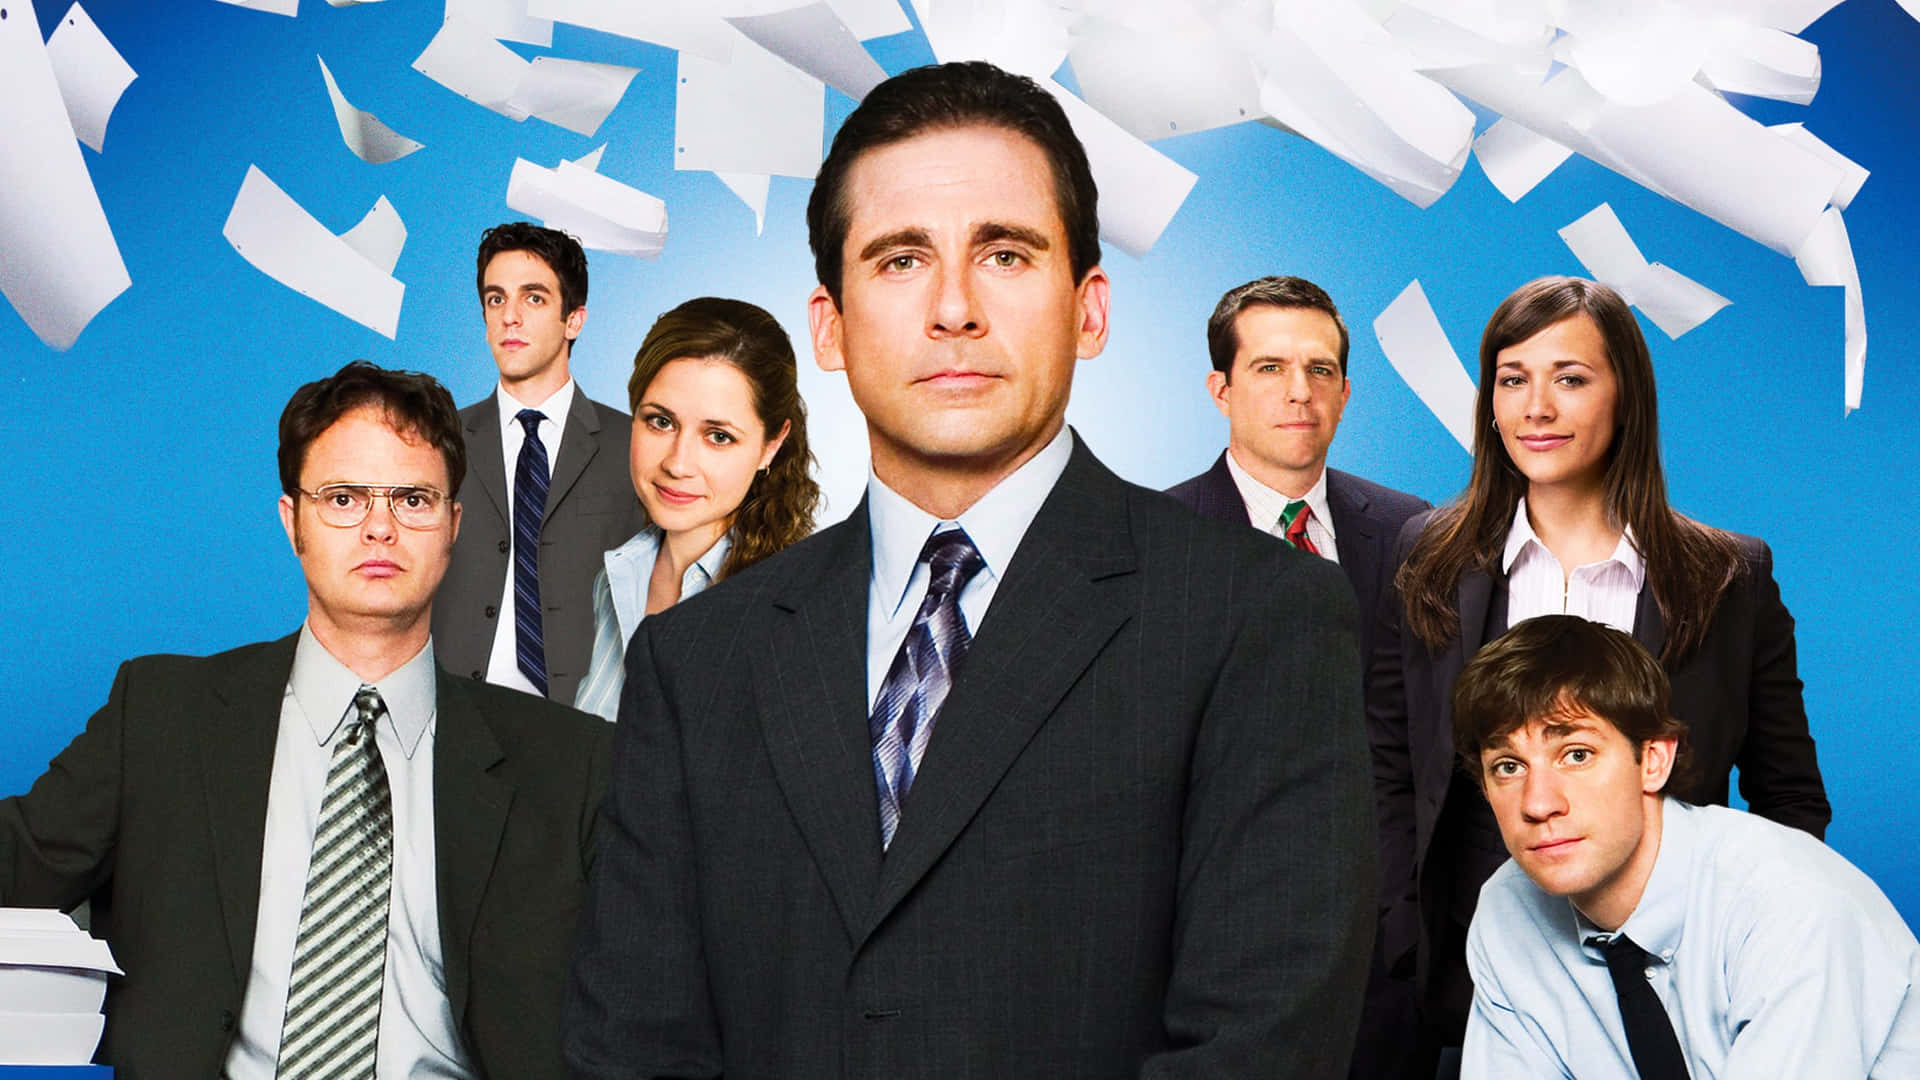 The Office Background Wallpaper